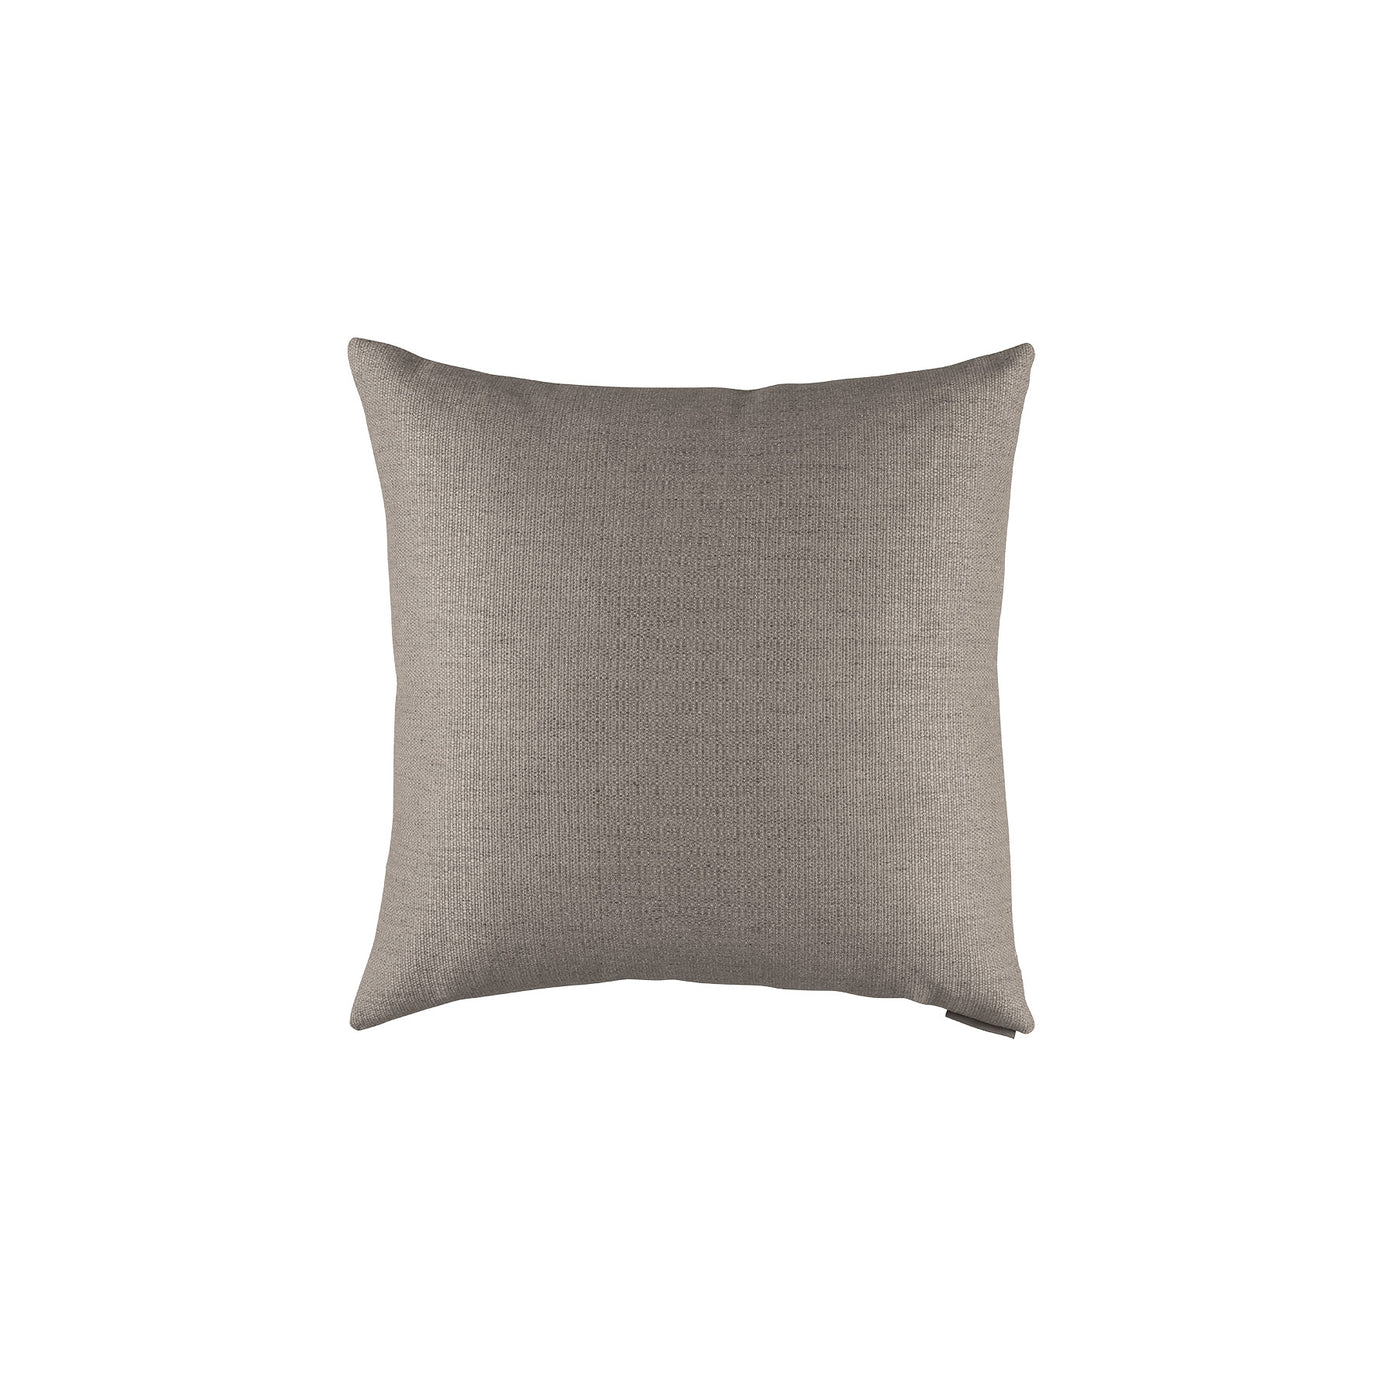 Liam Fawn Small Square Pillow (22x22)